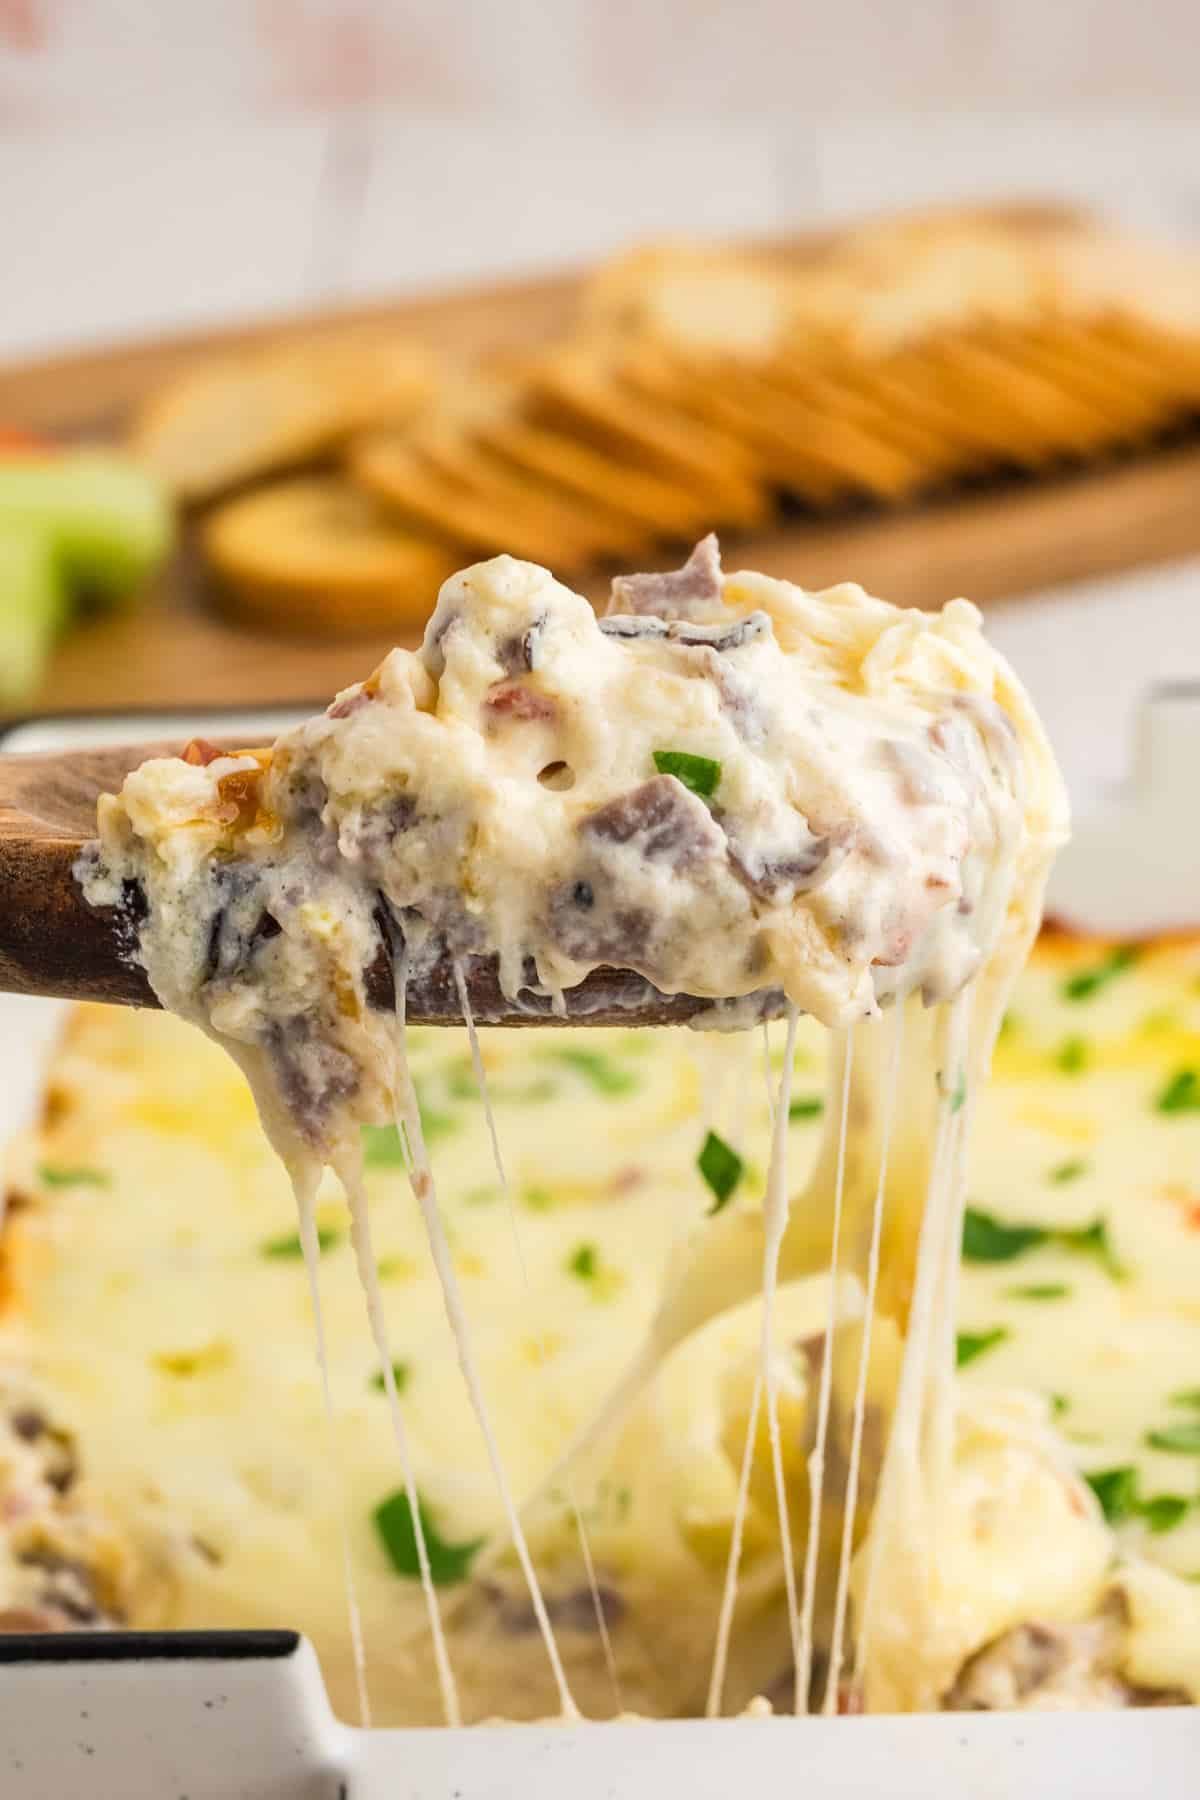 Wooden spoon with scoop of Philly cheesesteak dip with stringy cheesepull.